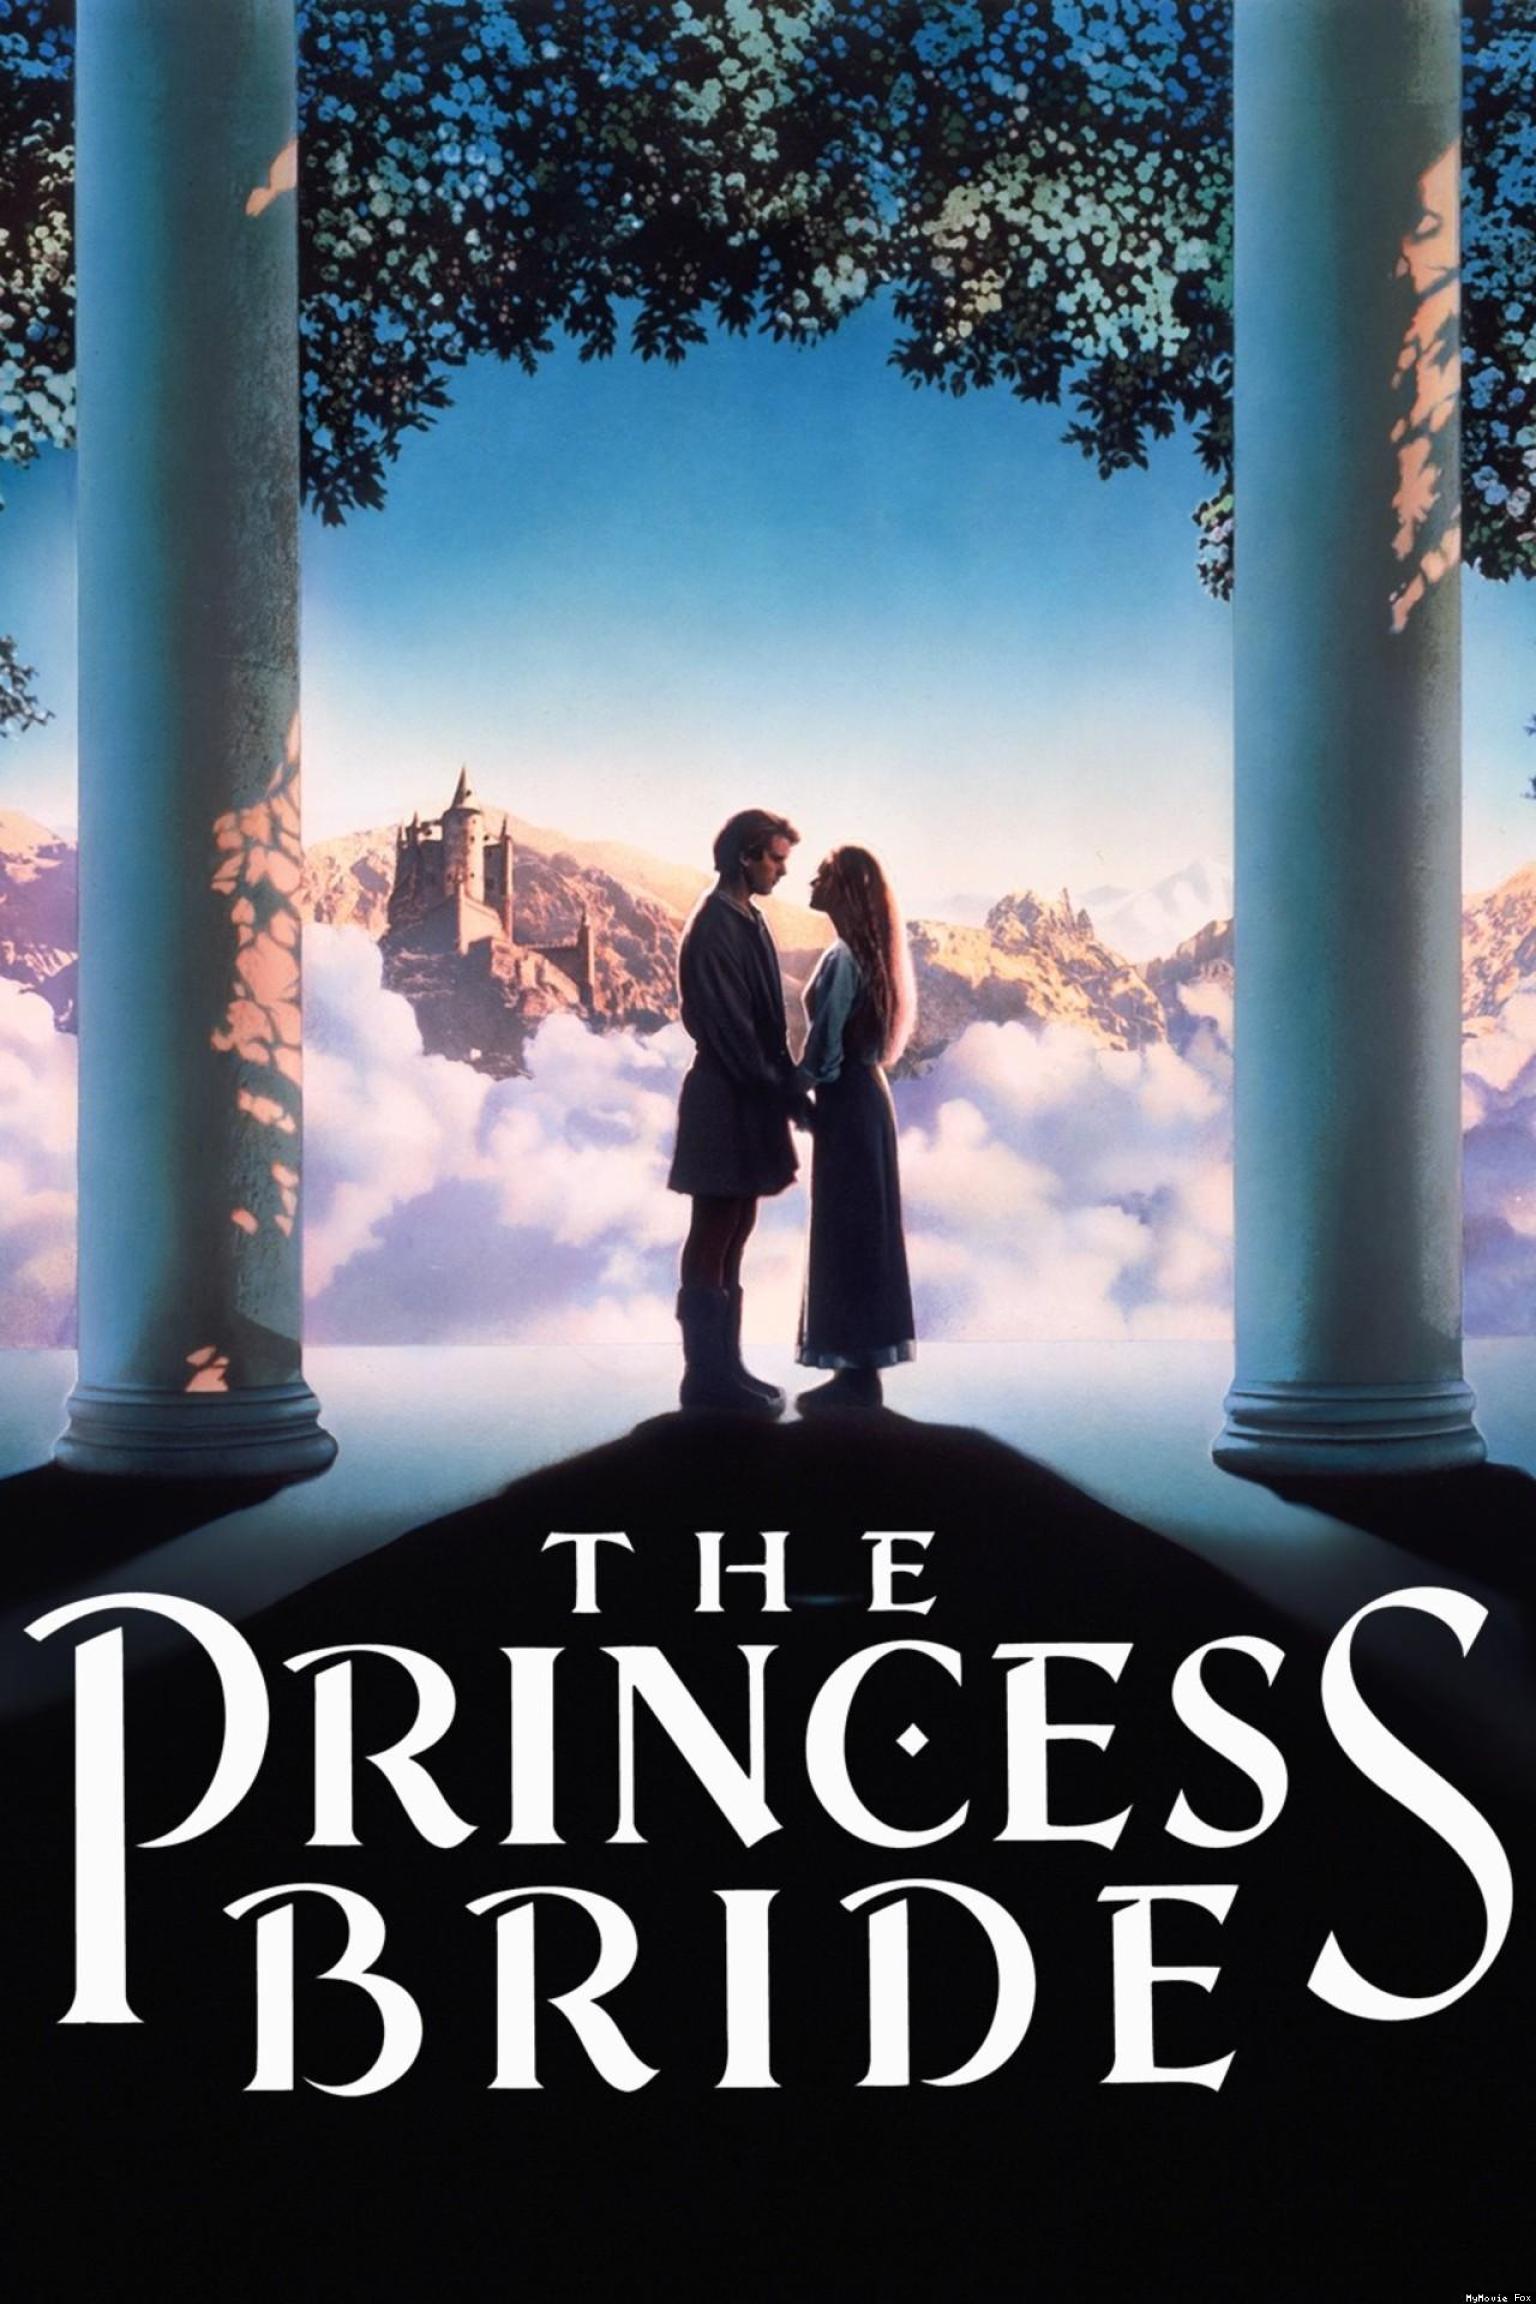 The Princess Bride, by William Goldman.
                              
                              
                              
                              Before the beloved movie, there was Goldman's book-within-a-book recounting the misadventures of a pair of starcrossed lovers, a righteous outlaw, and the scoundrels who get in their way.
                              
                              
                              
                              Buy now: The Princess Bride